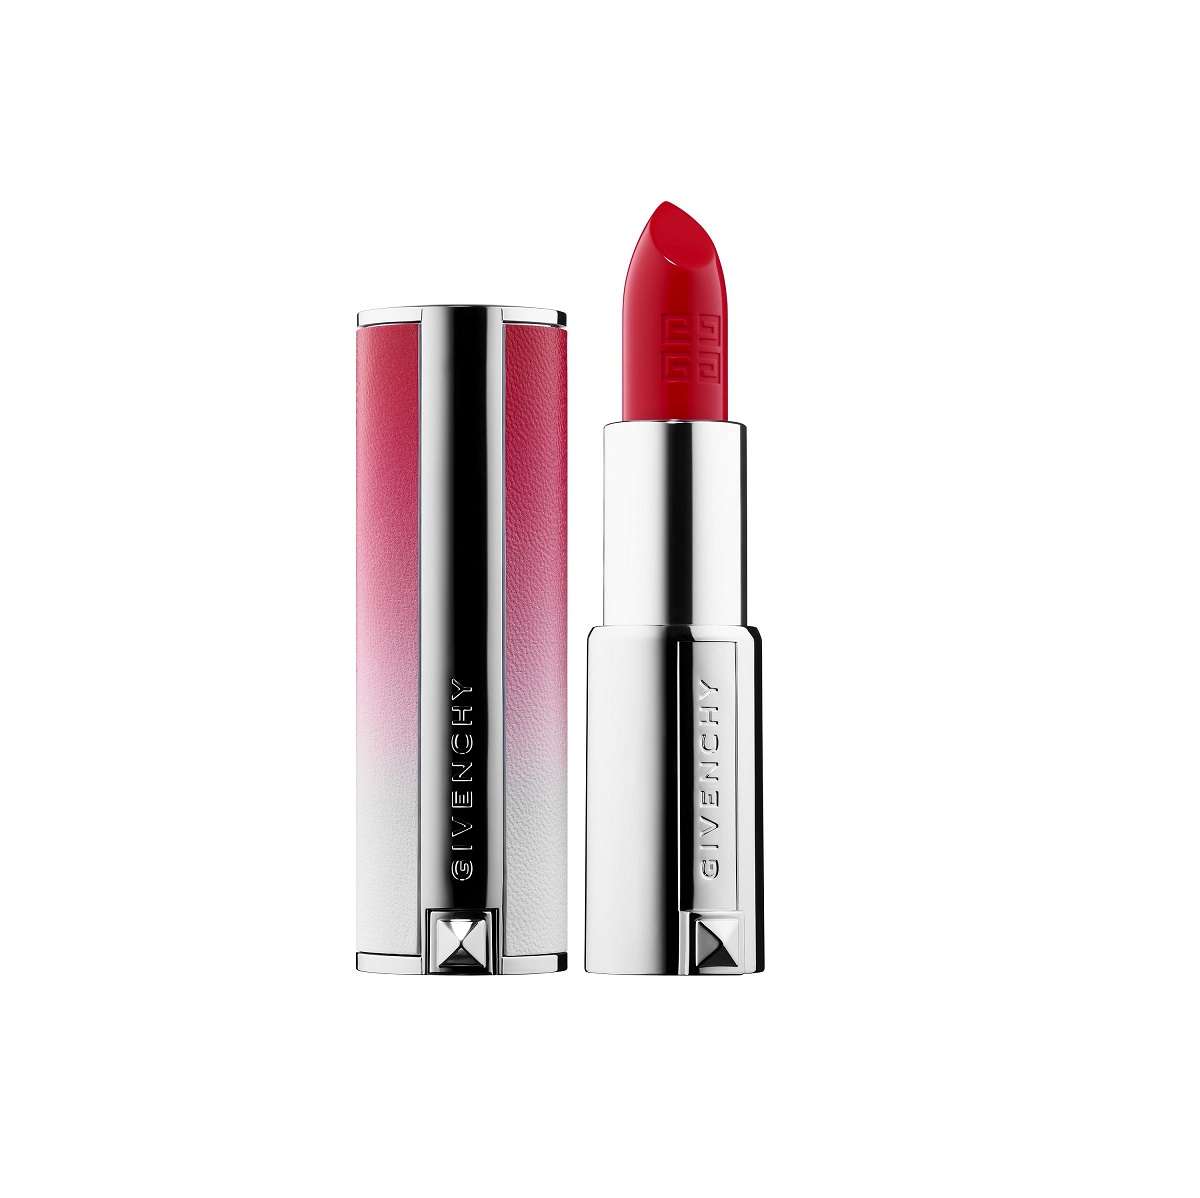 GIVENCHY LE ROUGE INTENSE COULEUR - Limited Edition | Fuschia